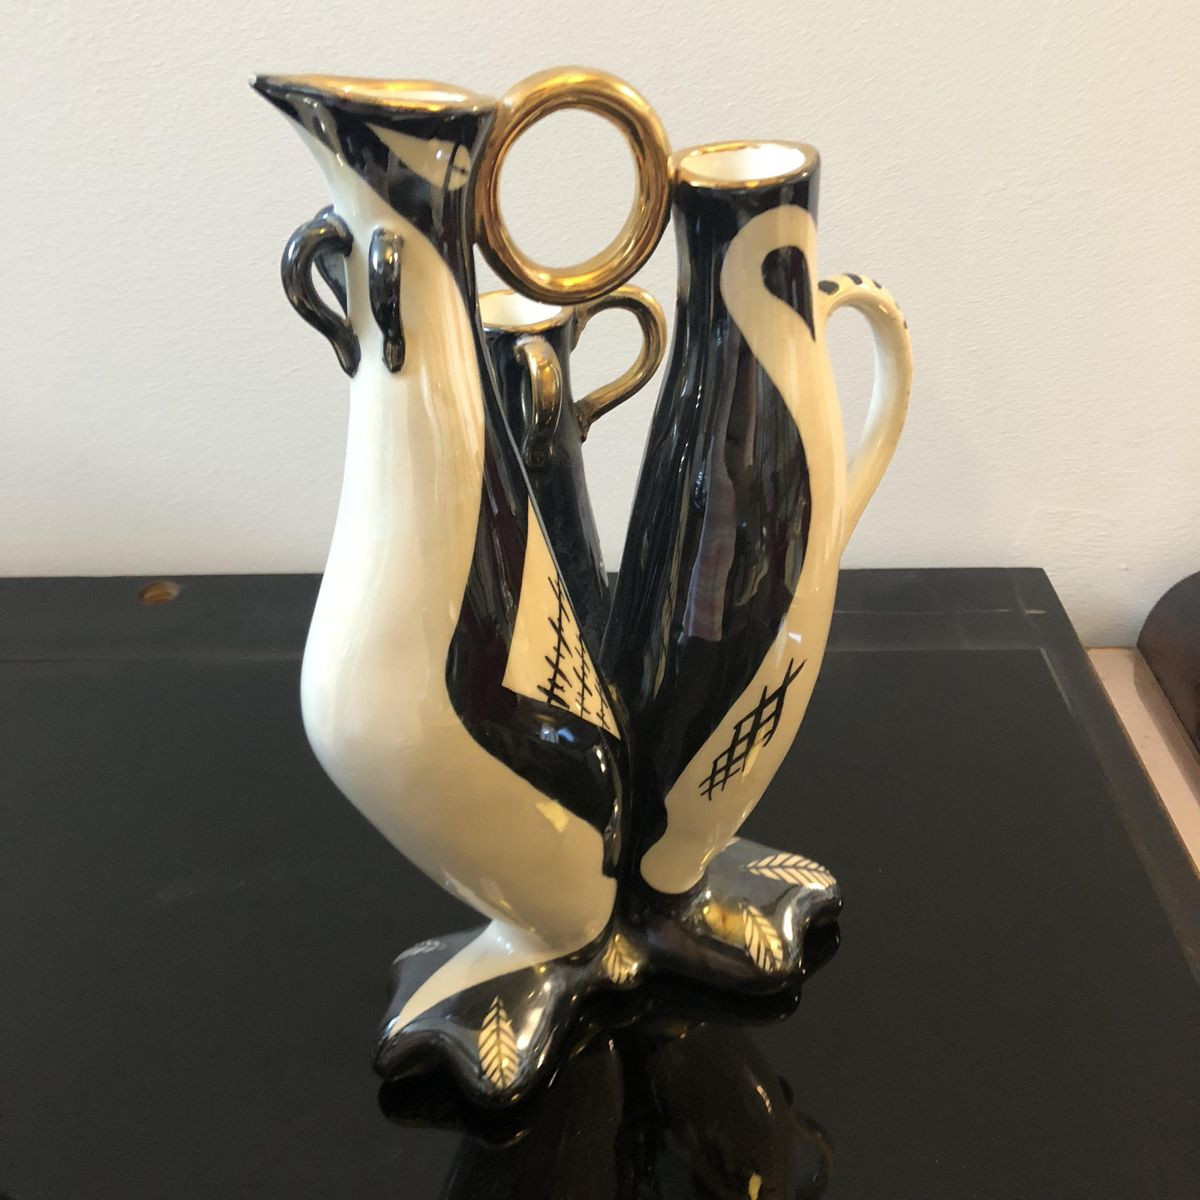 blown glass vases made in italy of italian black and white ceramic vases by g girardi 1950s set of 2 with regard to price per set